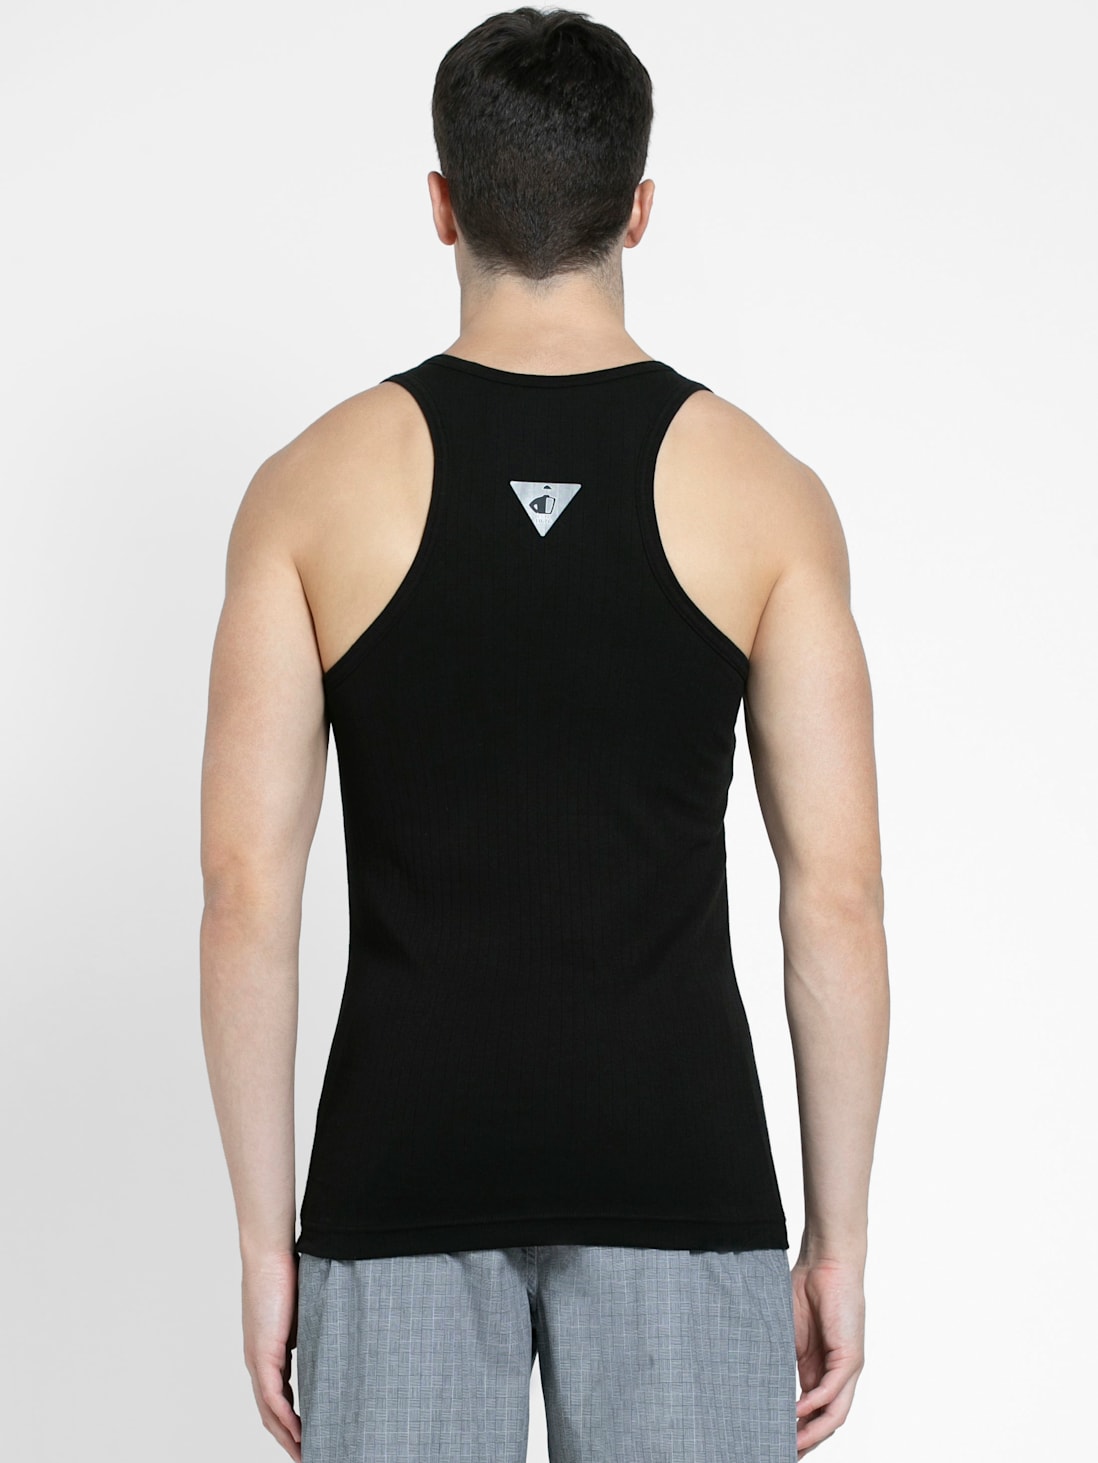 Buy Men's Super Combed Cotton Rib Racer Back Styling Round Neck